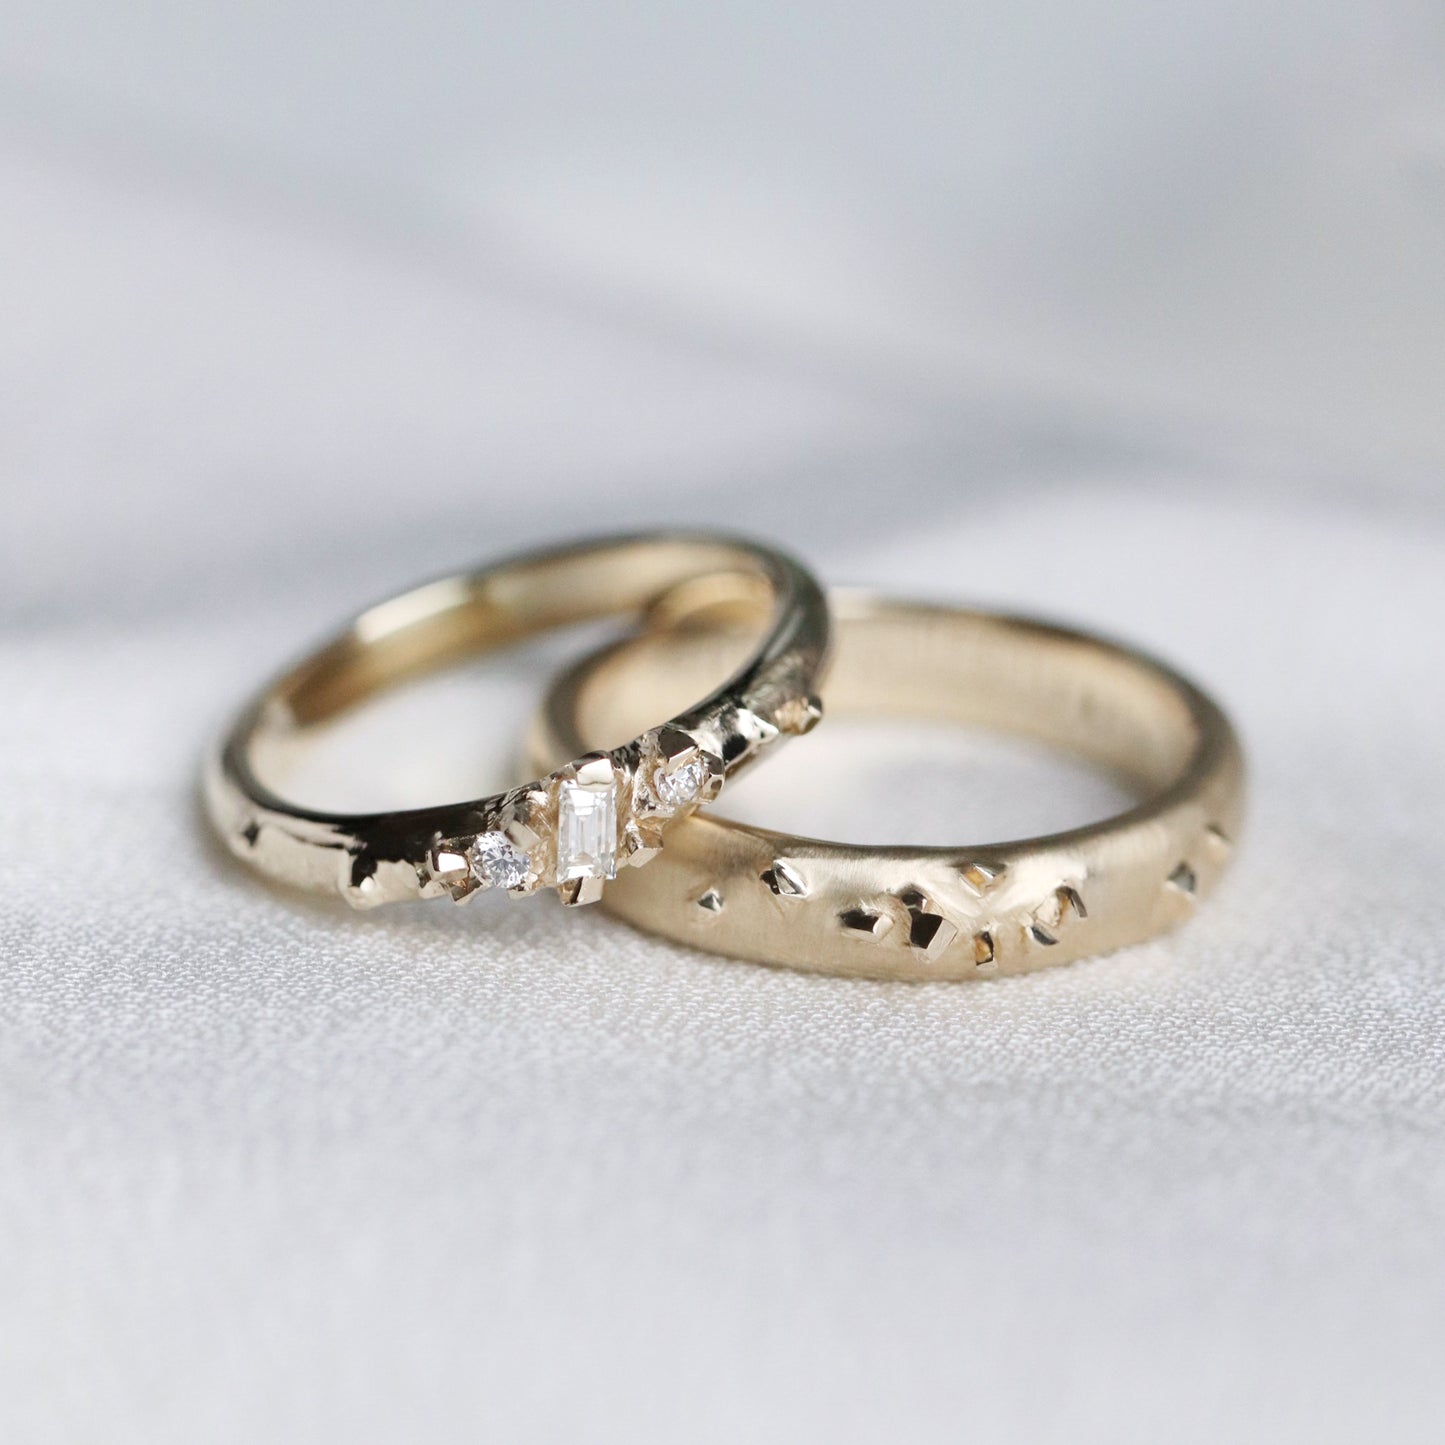 Wedding Bands - pyrite design with baguette diamond